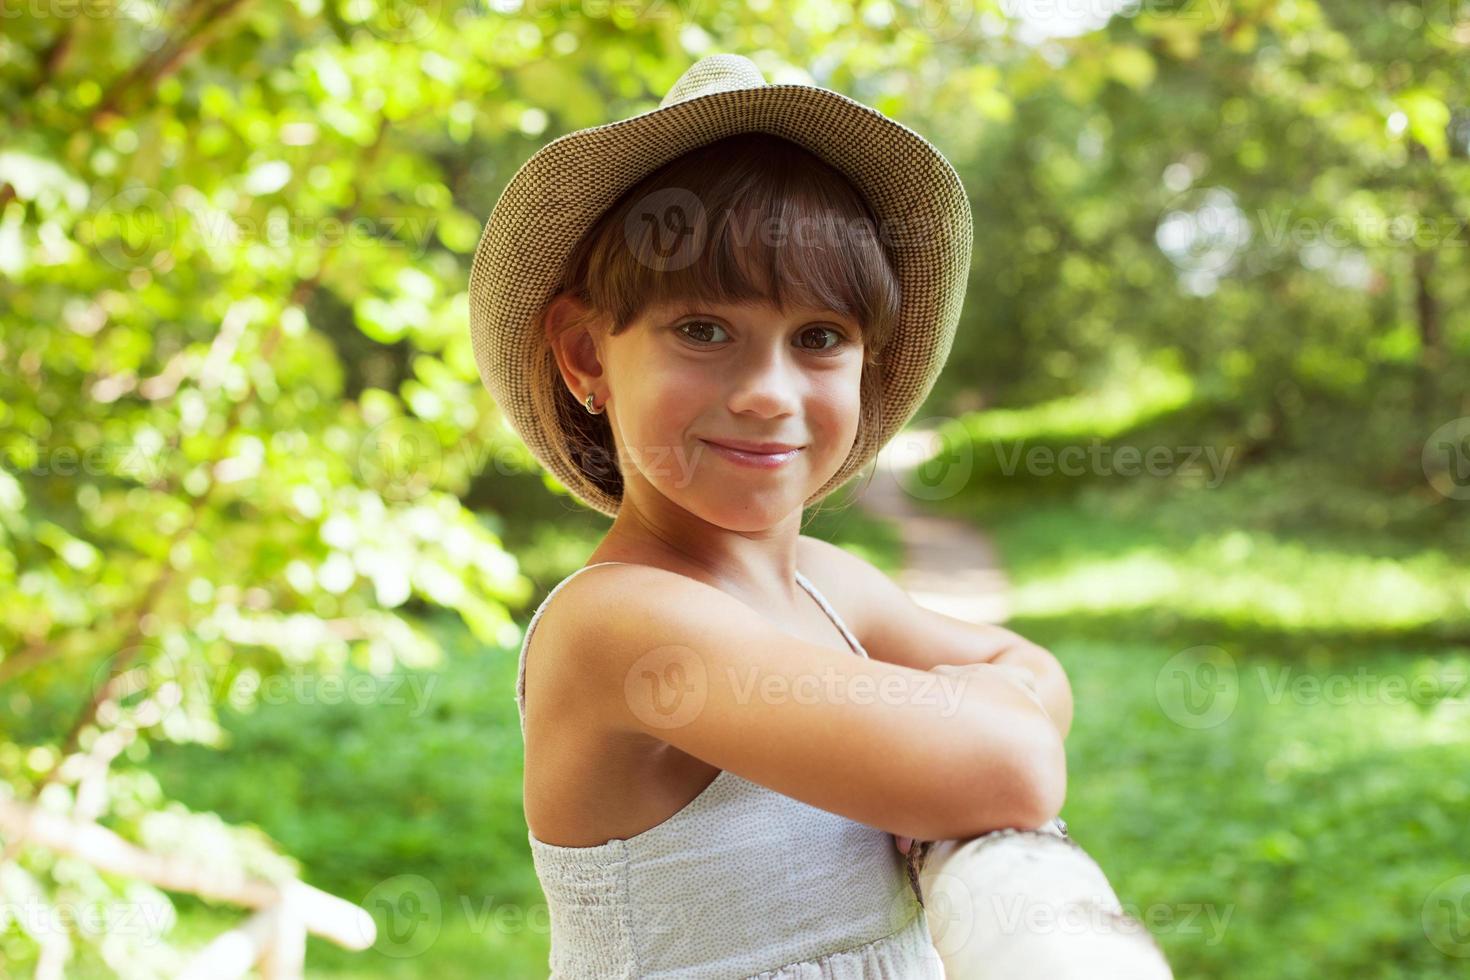 Cheerful smiling girl in a hat photo